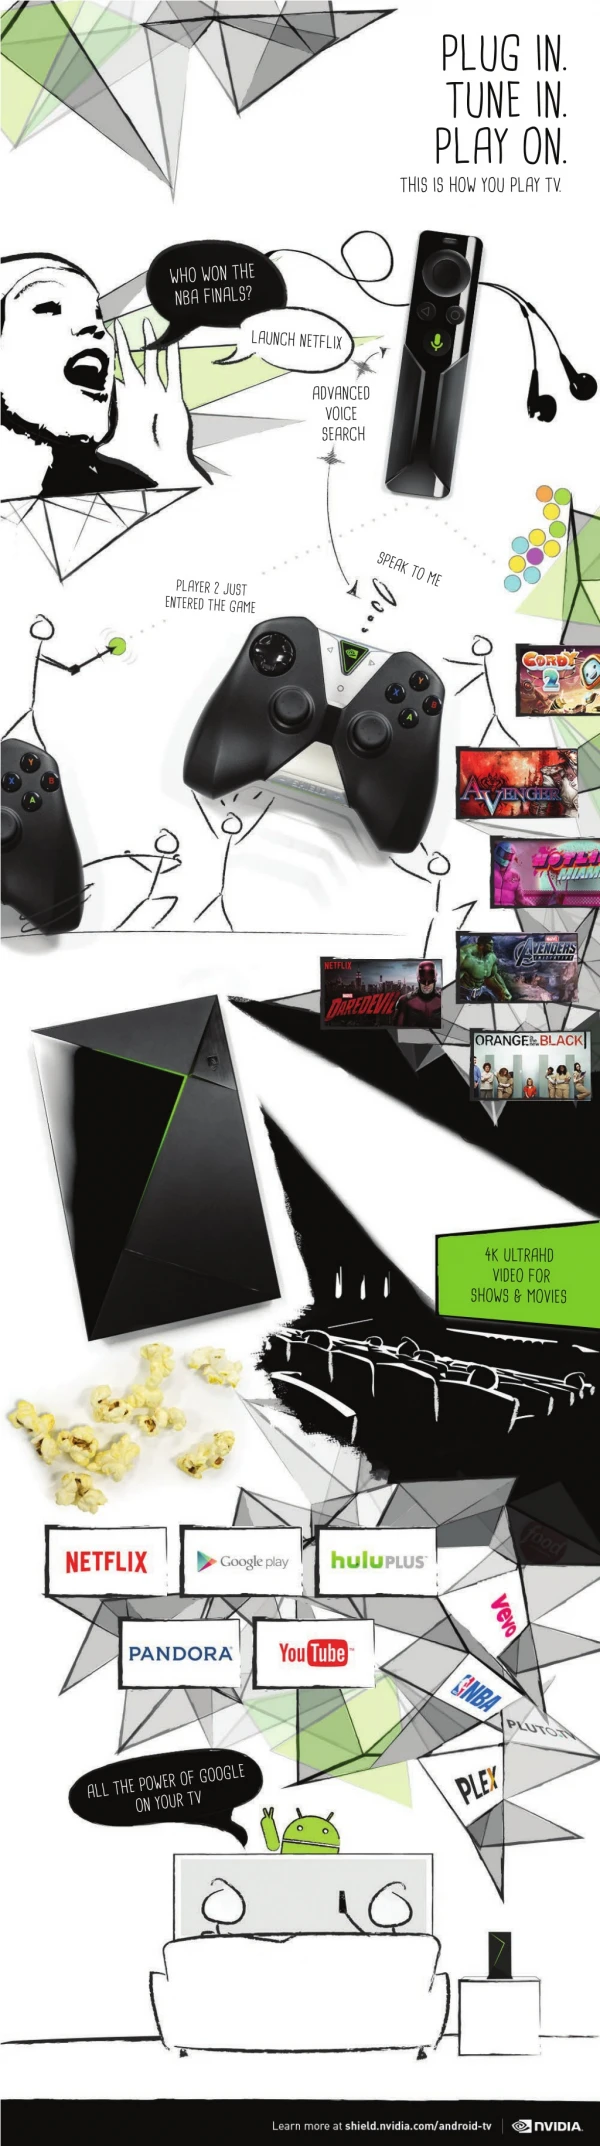 NVIDIA SHIELD Features Infographic